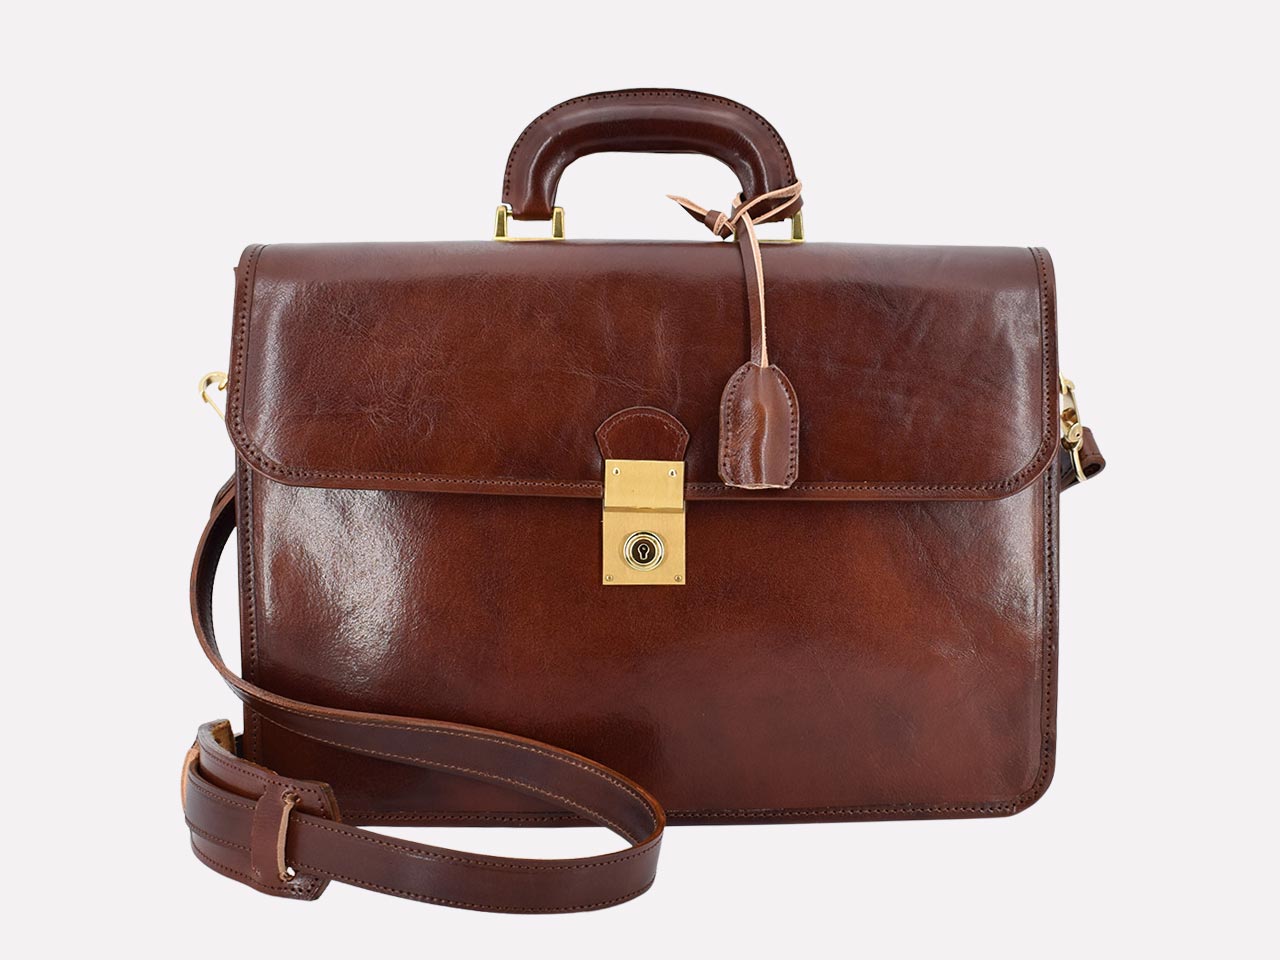 Veritas, Italian leather briefcase designed and handcrafted in Rome by Riccardo Mancini